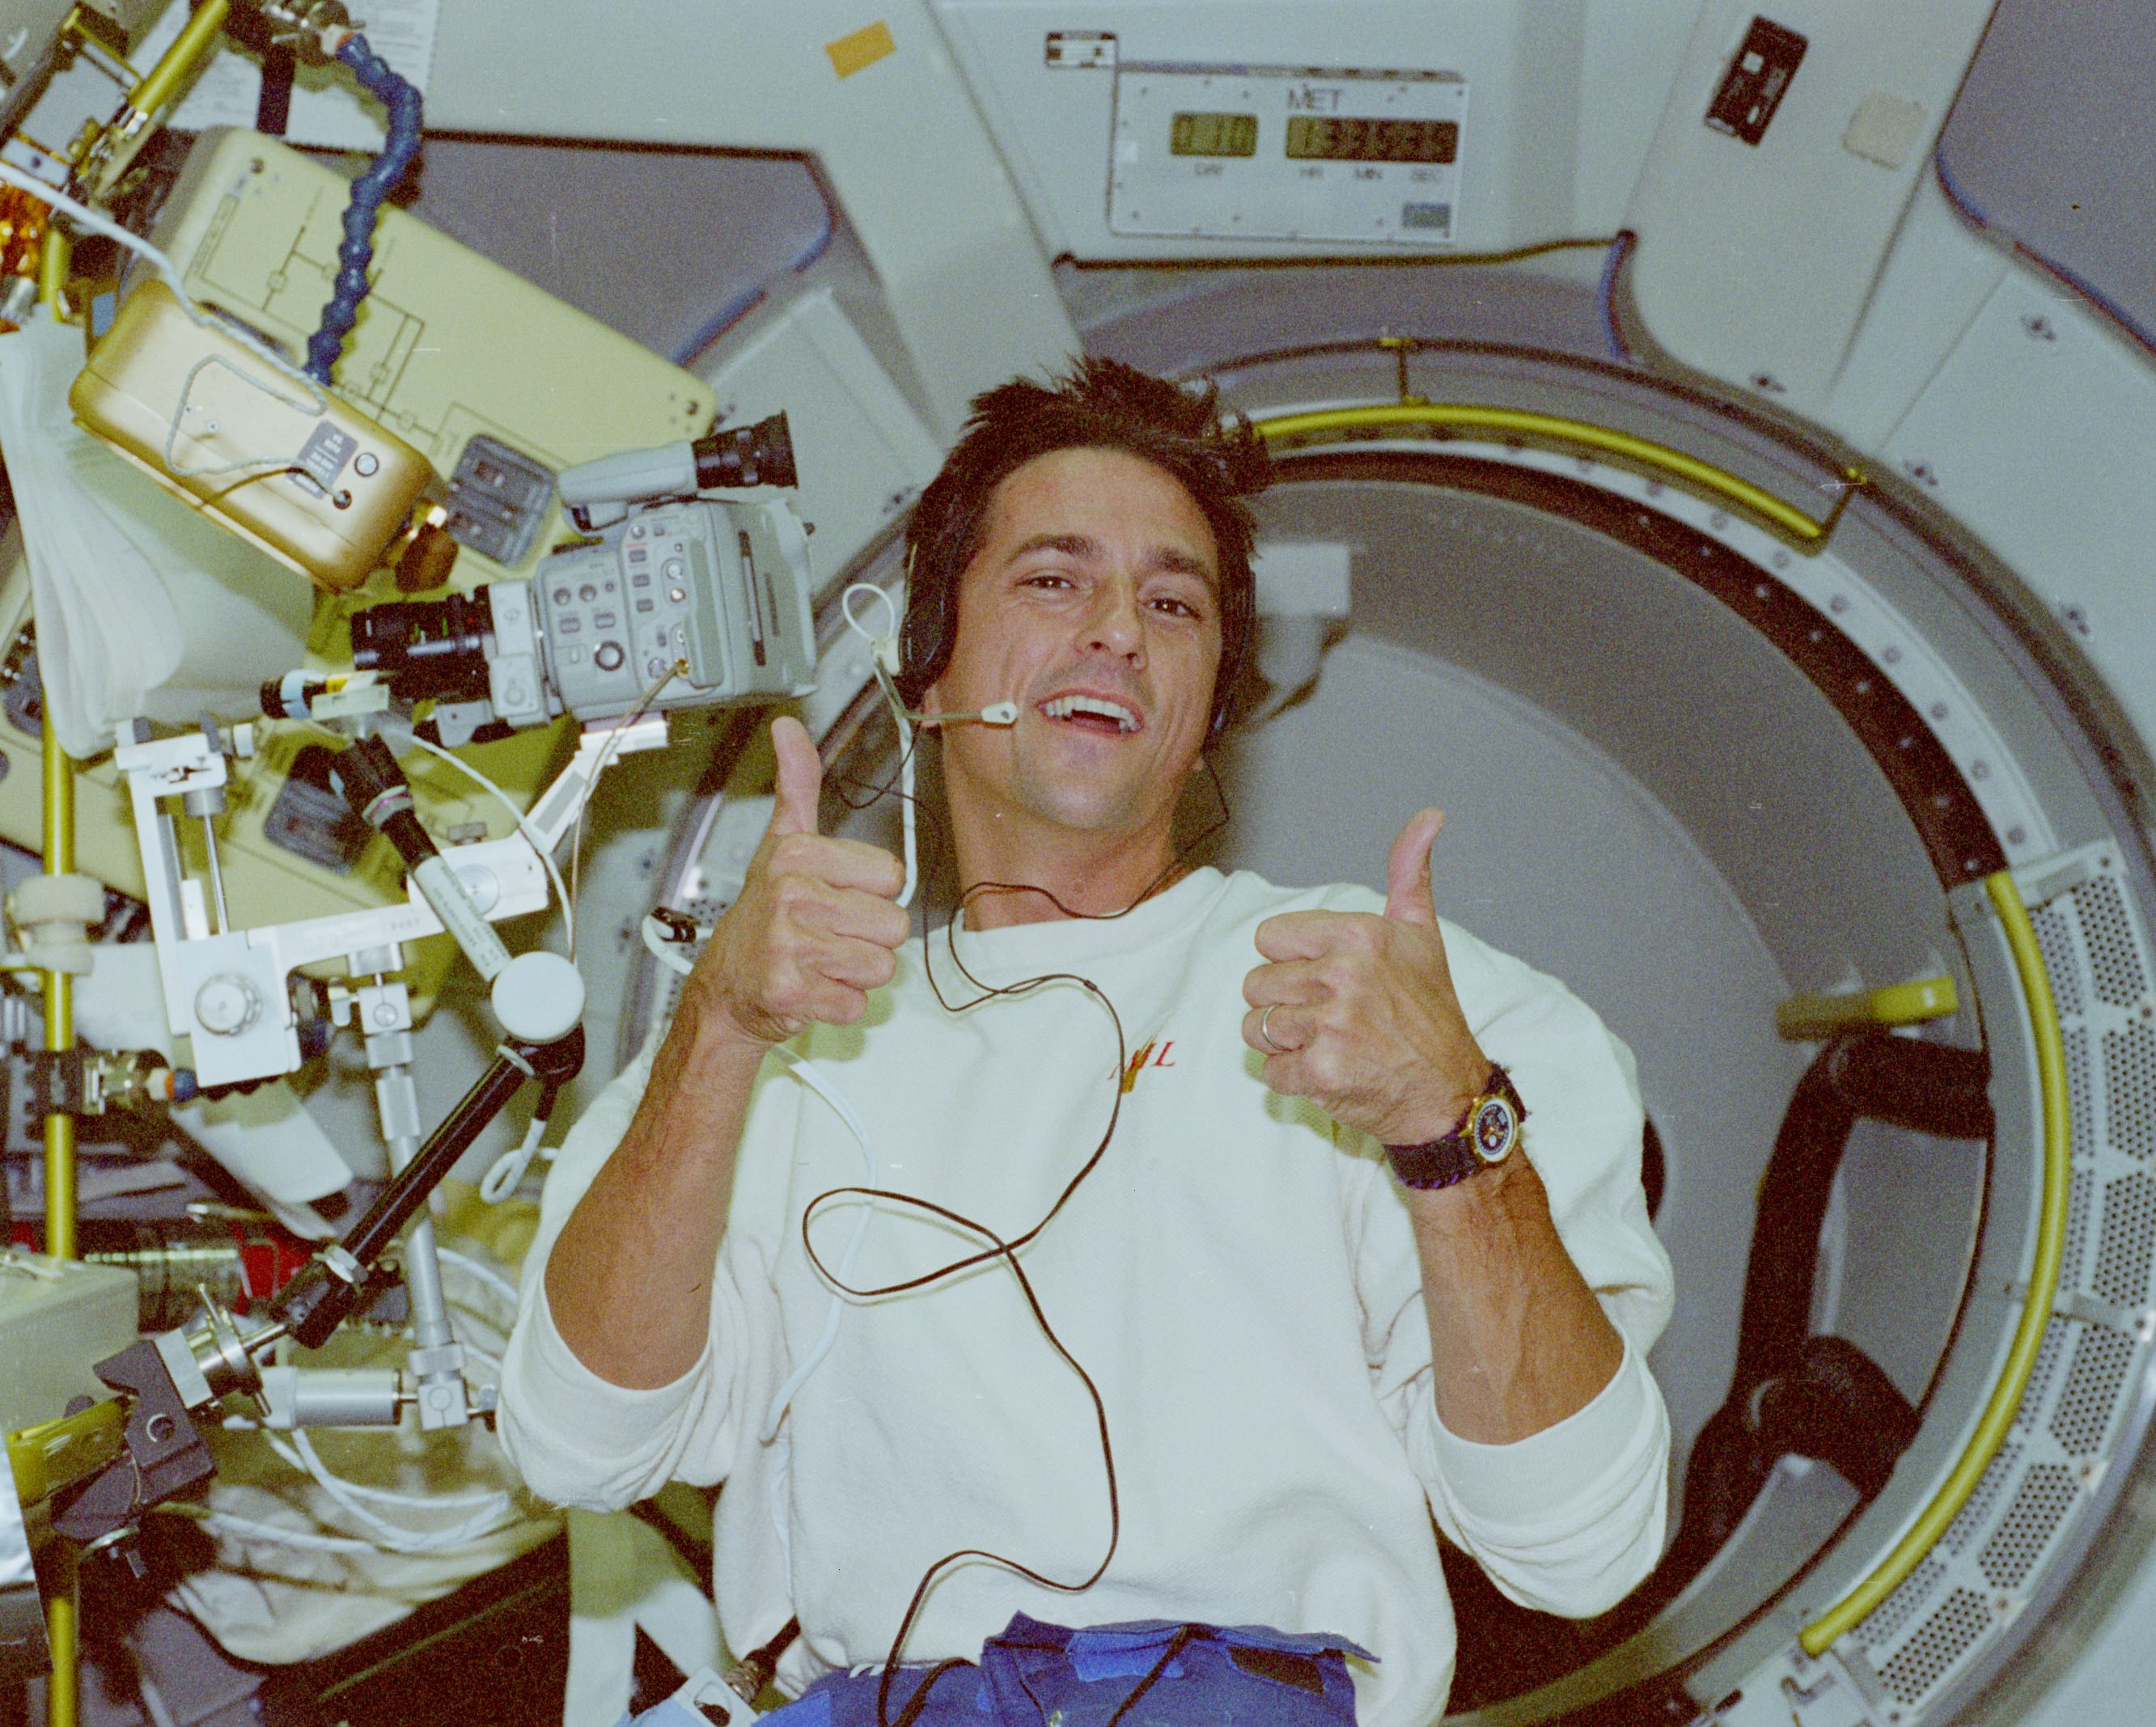 Donald A. Thomas gives two thumbs up for the crew’s performance during the mission